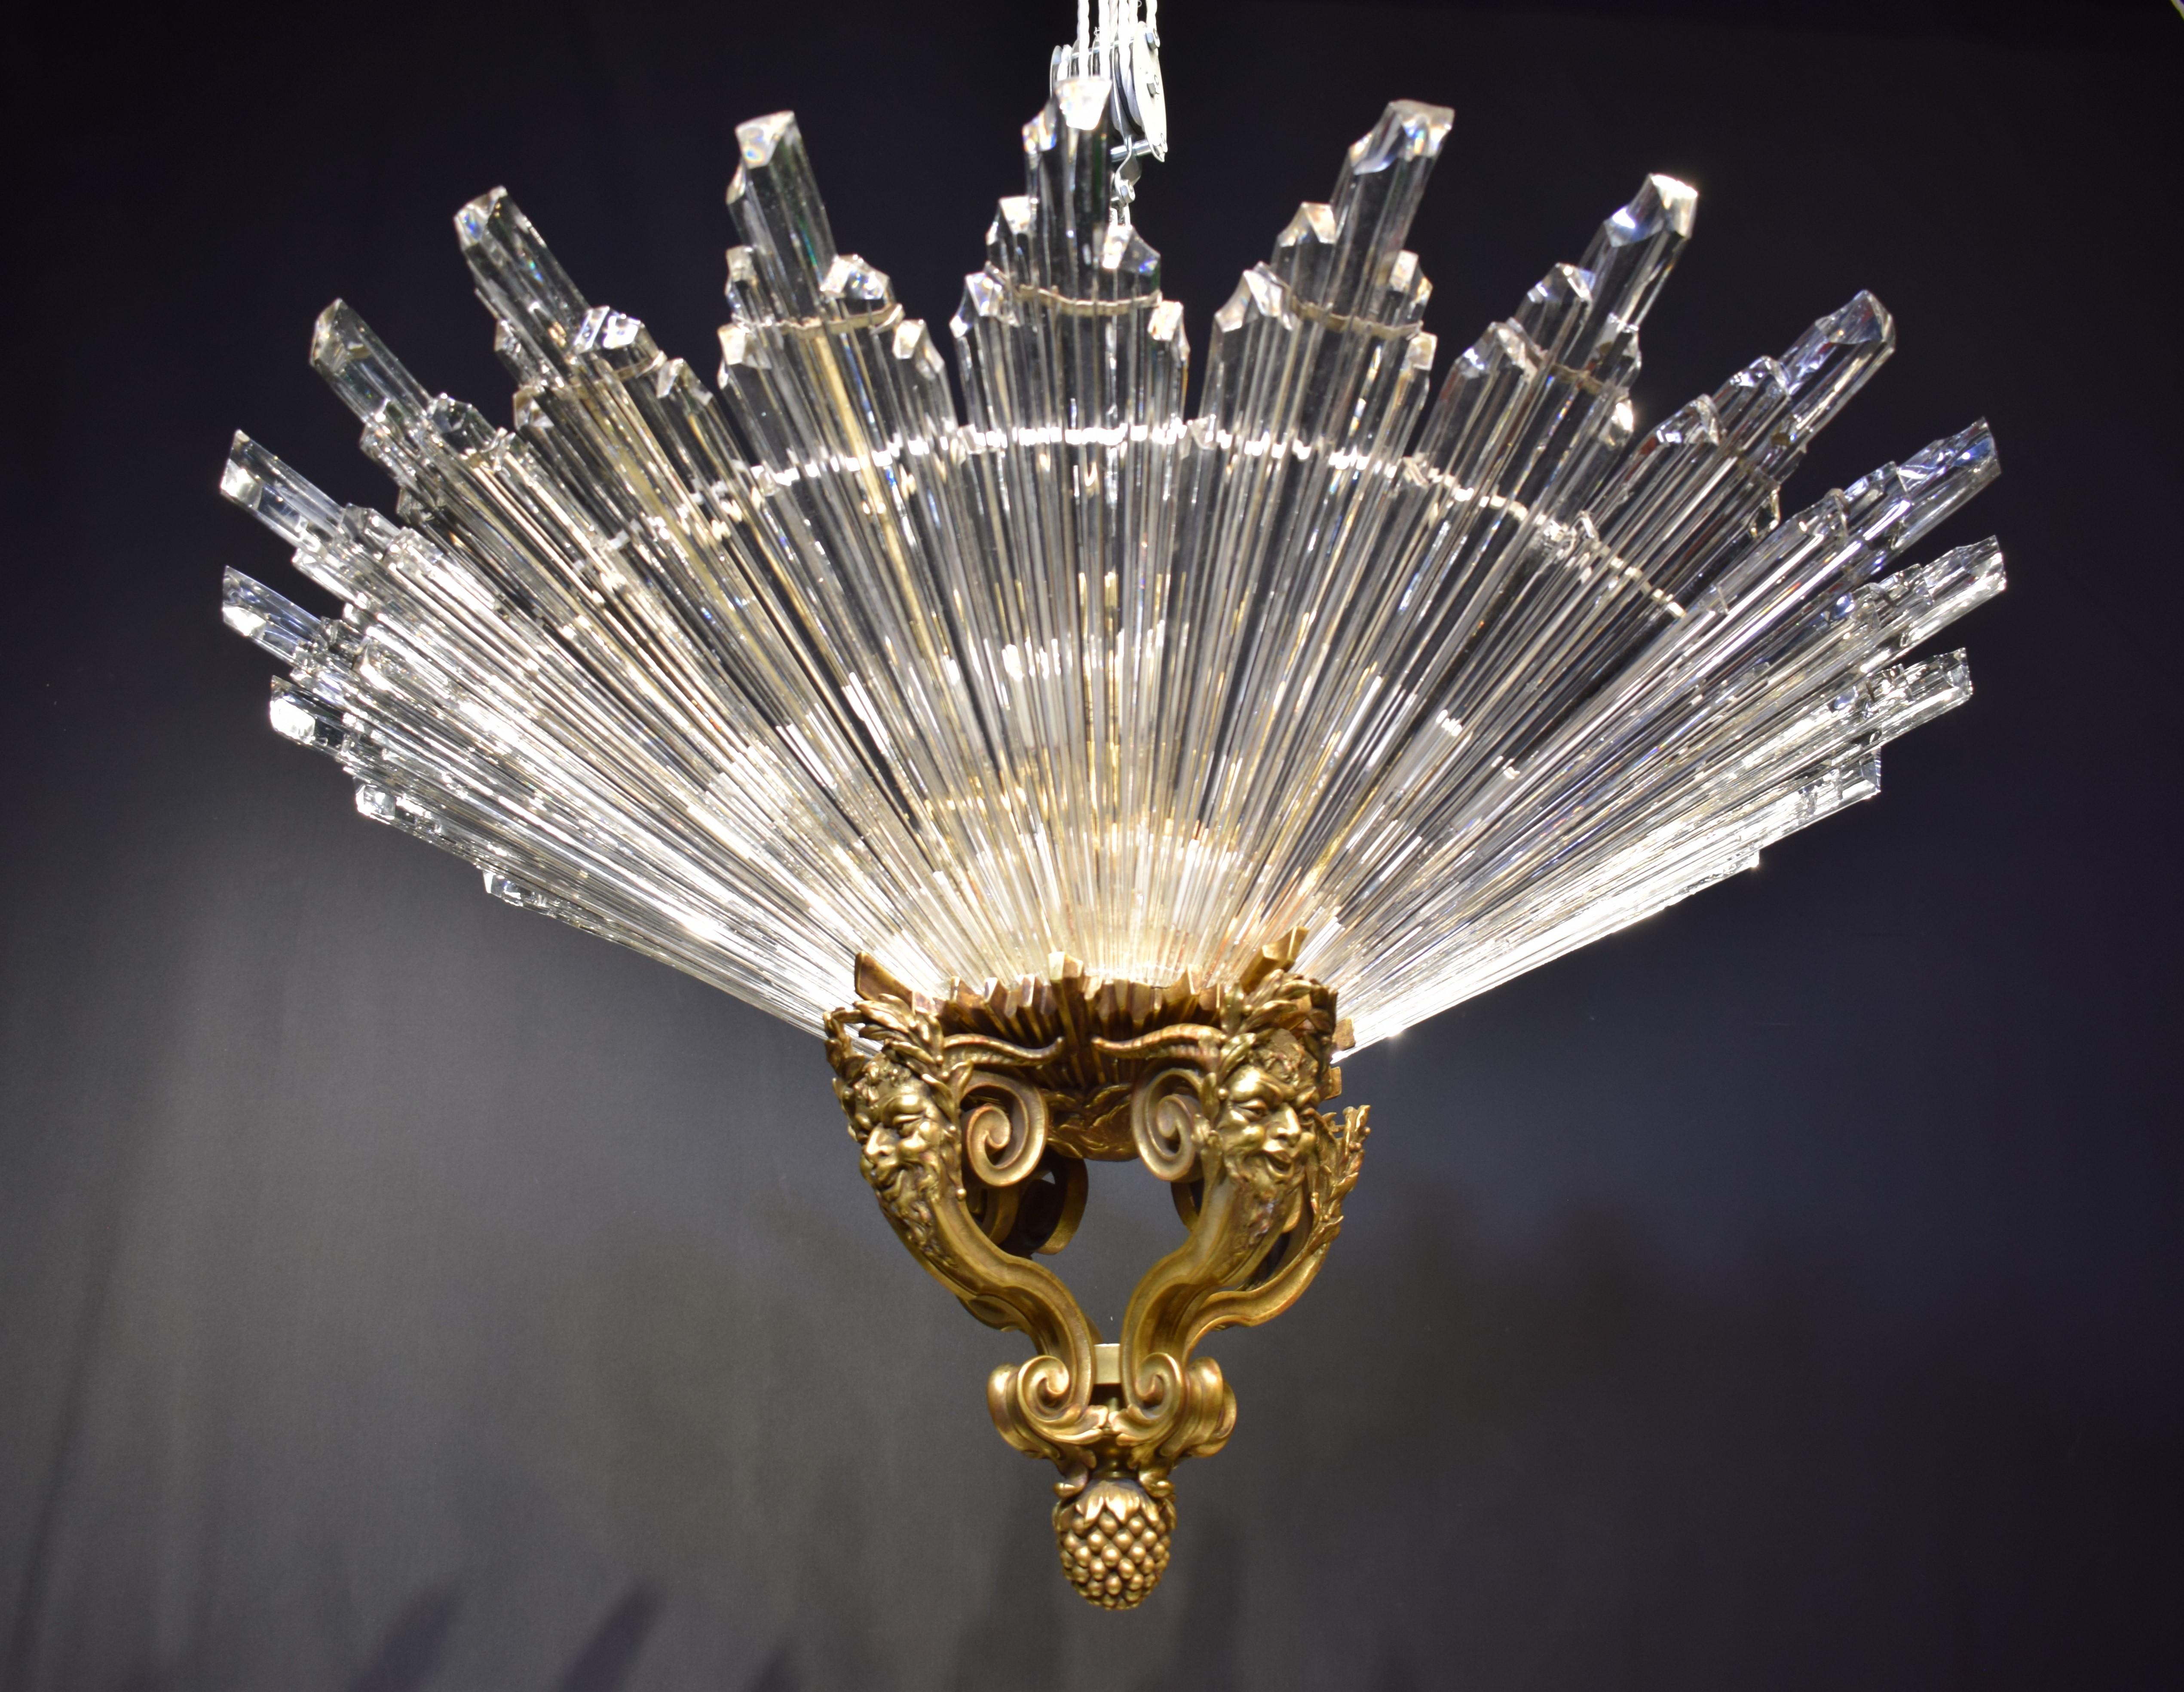 E. F. Caldwell & Co. Magnificent & Extraordinary Gilt Bronze & Crystal Chandelier. featuring crystal rays at the bottom, gilt bronze ornament depicting male faces. Circa 1910. Photograph to be found on Smithsonian Libraries, 